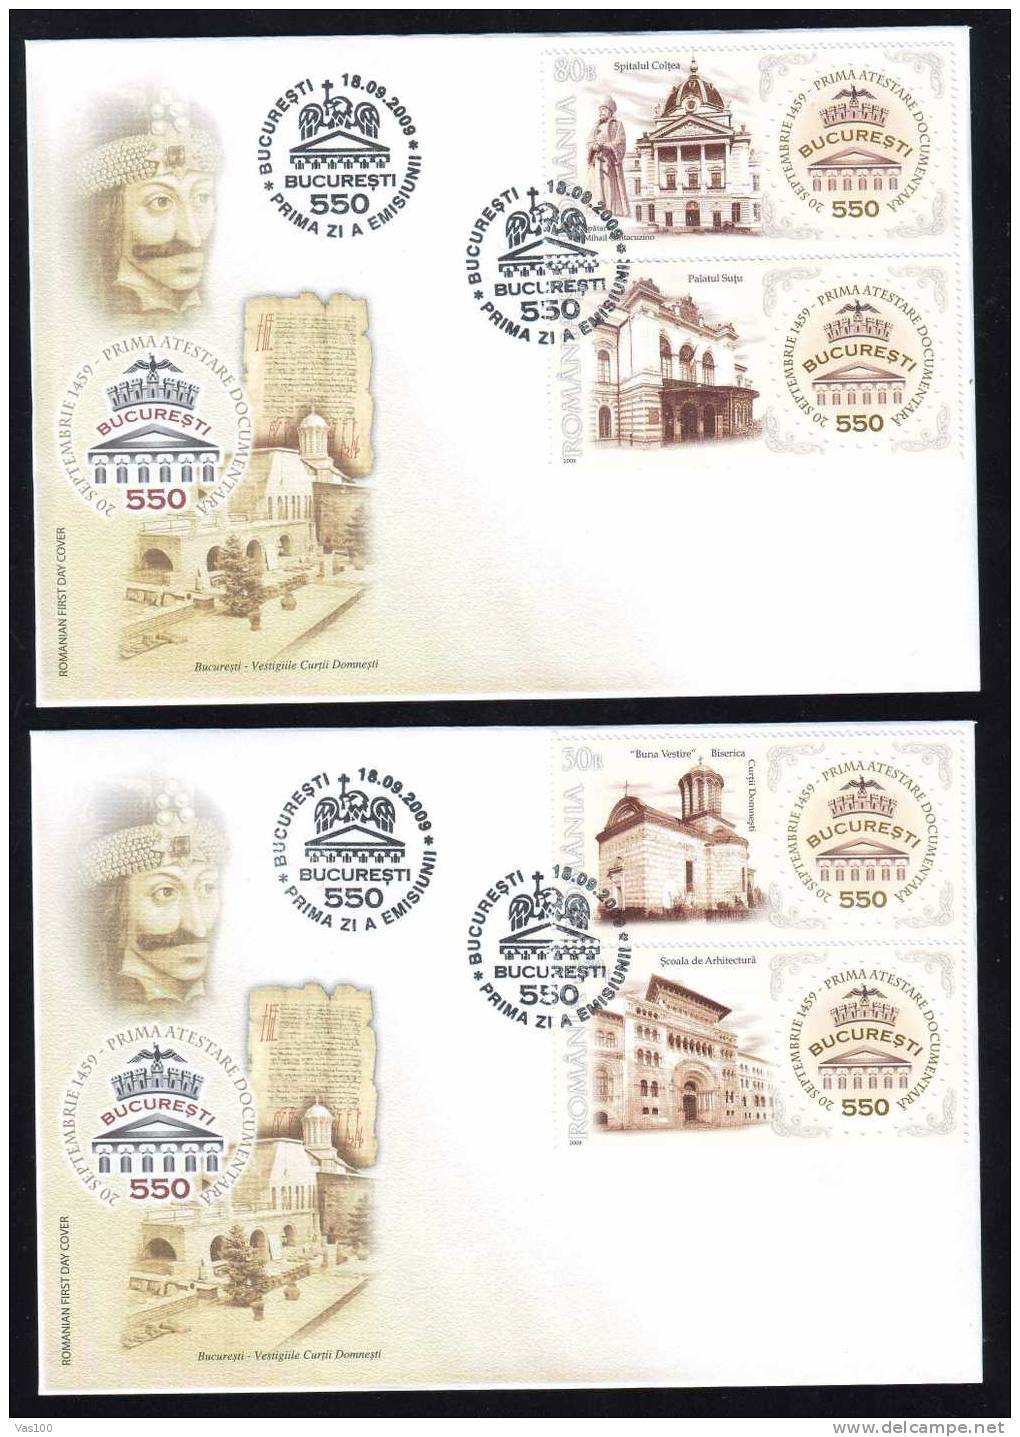 ROMANIA 2009 New Bucharest - 550 Years - Dracula Vlad Tepes ,2 Covers FDC. - FDC